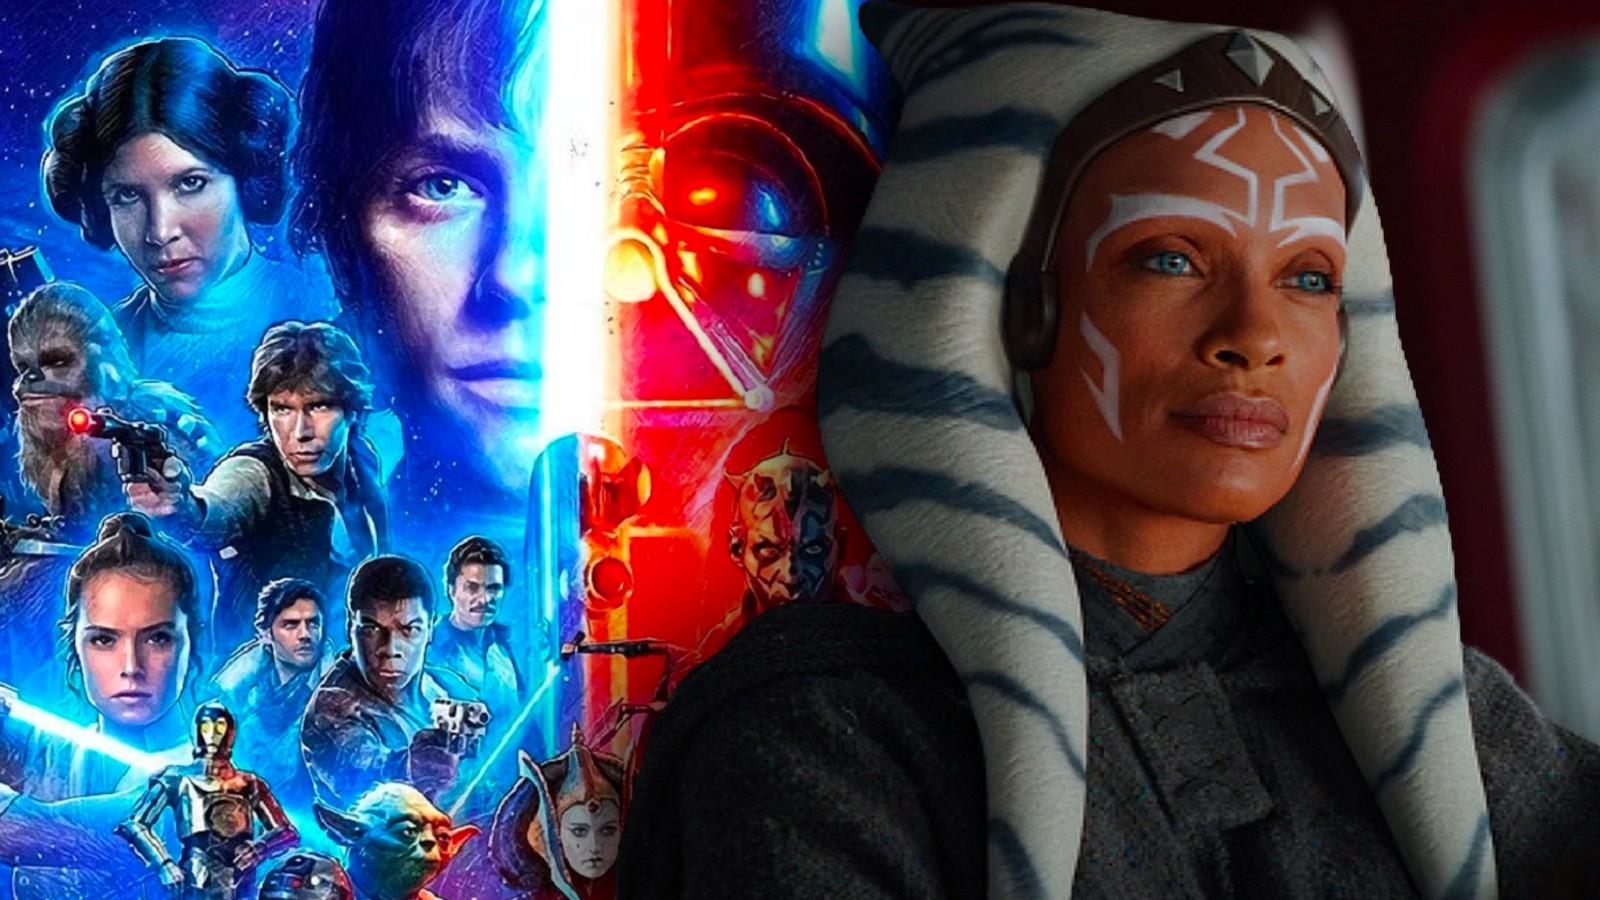 The 'Star Wars' timeline is confusing. Here's when 'The Mandalorian,'  'Ahsoka' and more take place